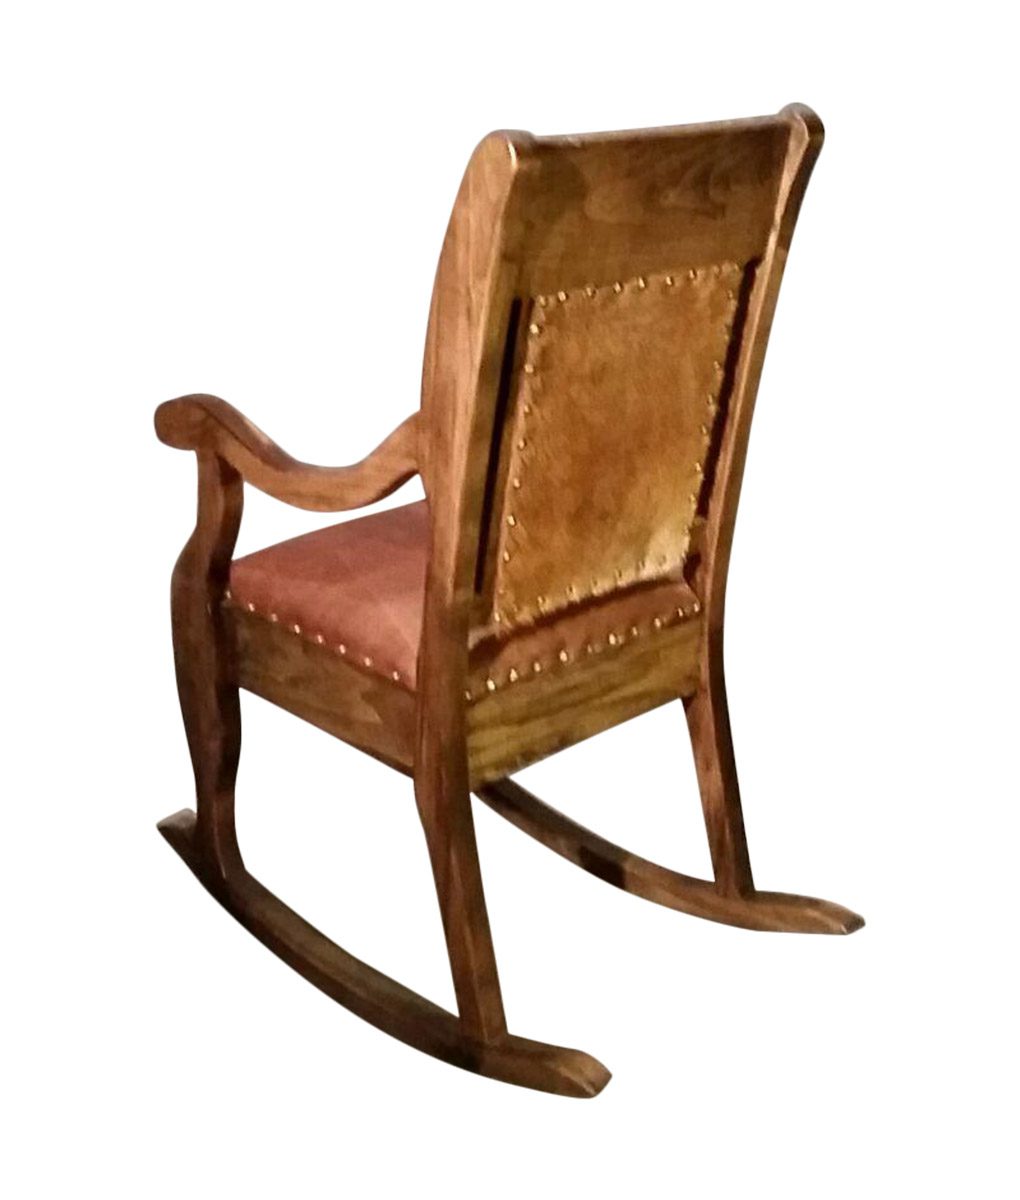 Traditional Rocking Chair Wood Frame With Leather Or Cowhide Seat